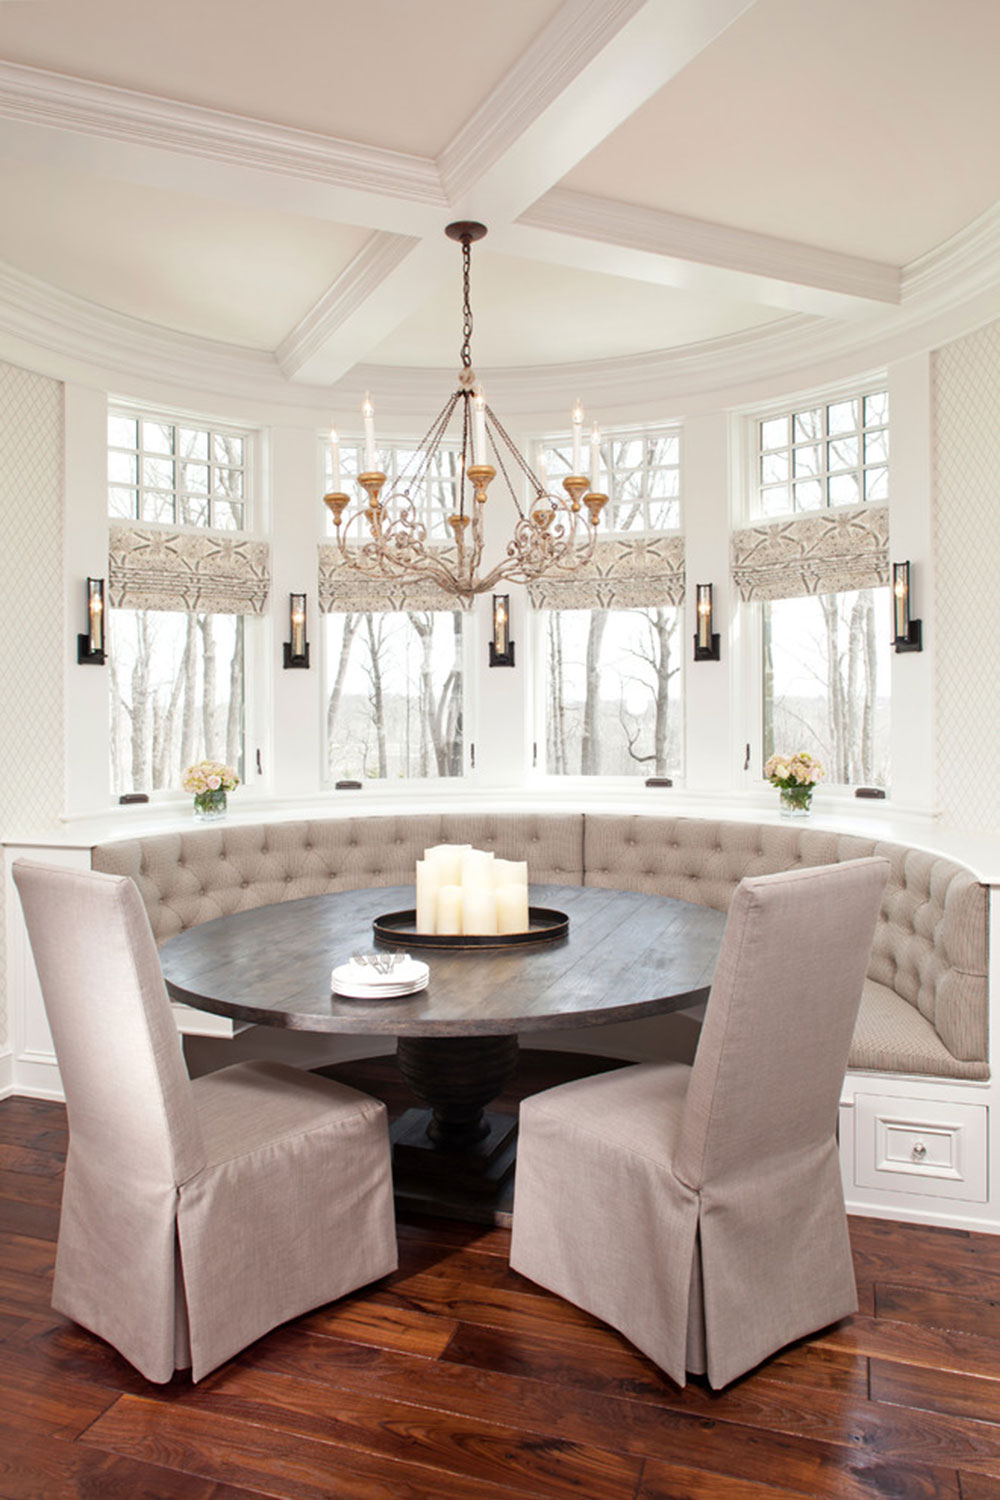 Homey-Feelings-With-These-Bay-Window-Decor-8 bay window decor to try out in your home